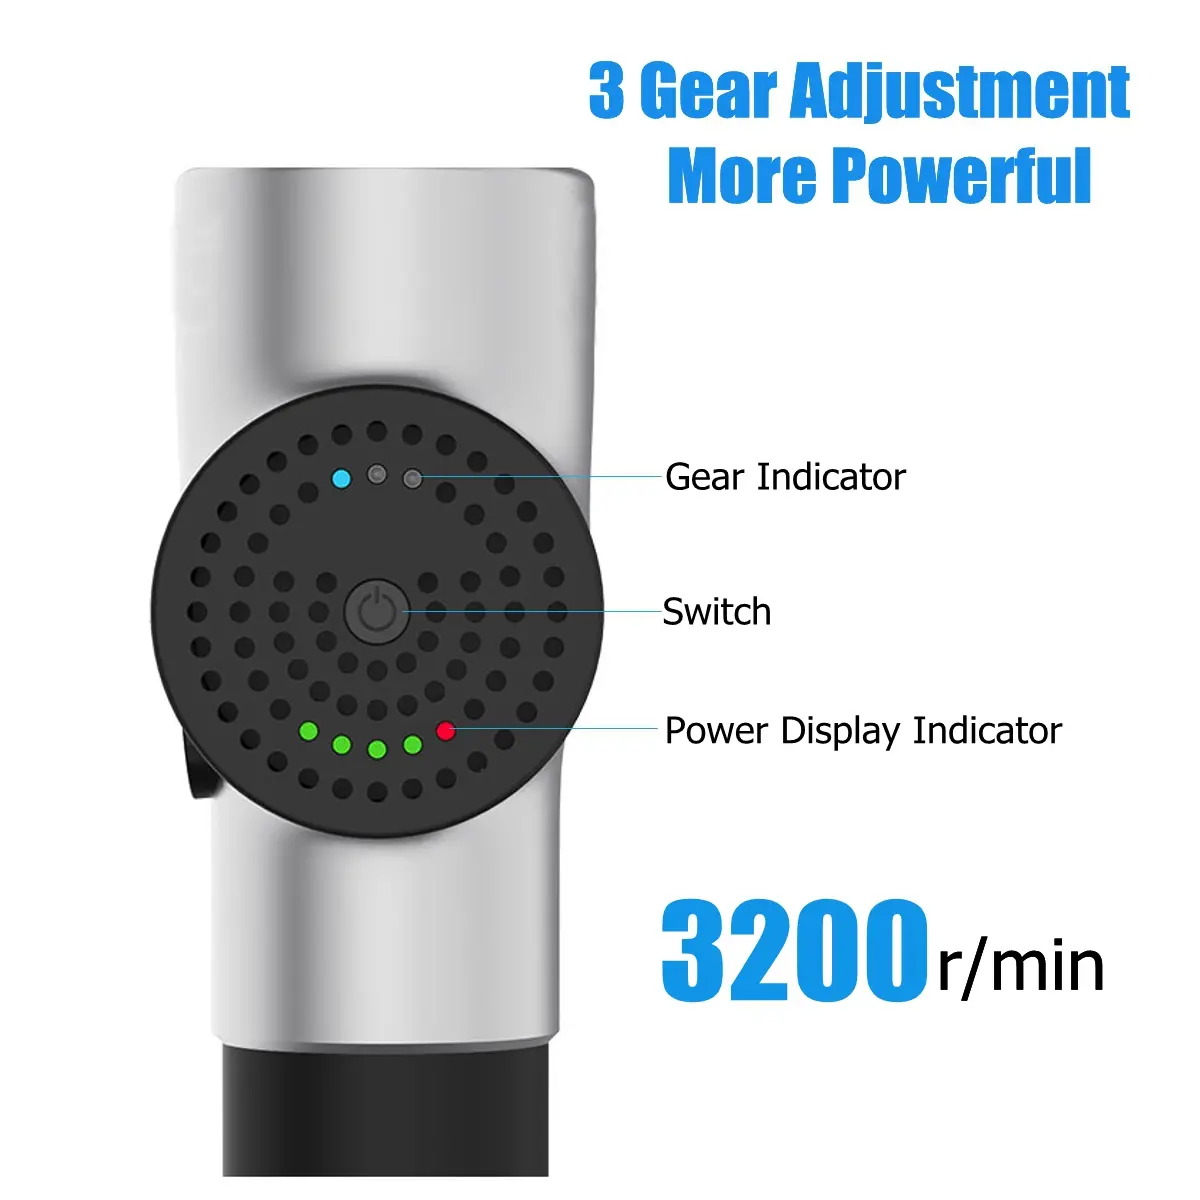 3 Speed Deep Tissue Muscle Massager Relaxation Vibration Electric Massager Cordless Percussion Massage G un Rechargeable Handheld Stimulation With 4 Head